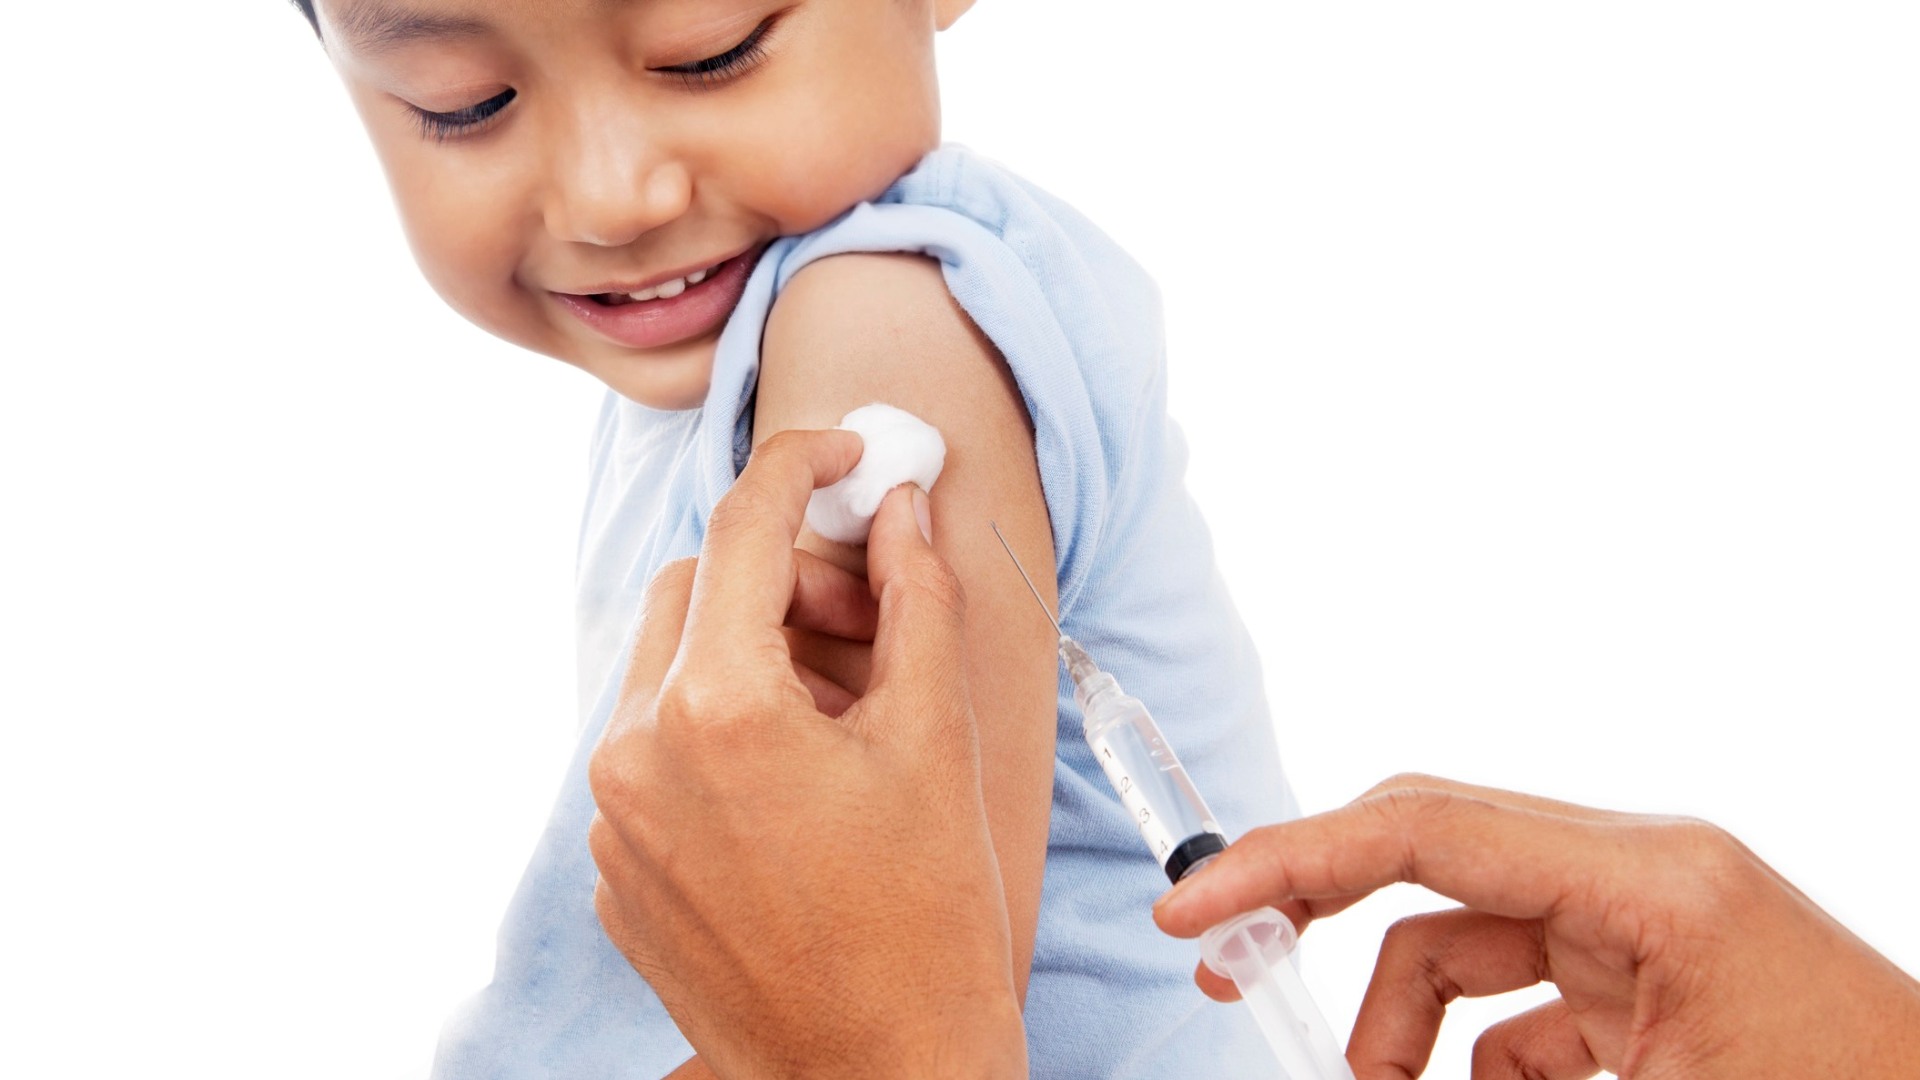 Children Not Vaccinated Vulnerable To Many Diseases